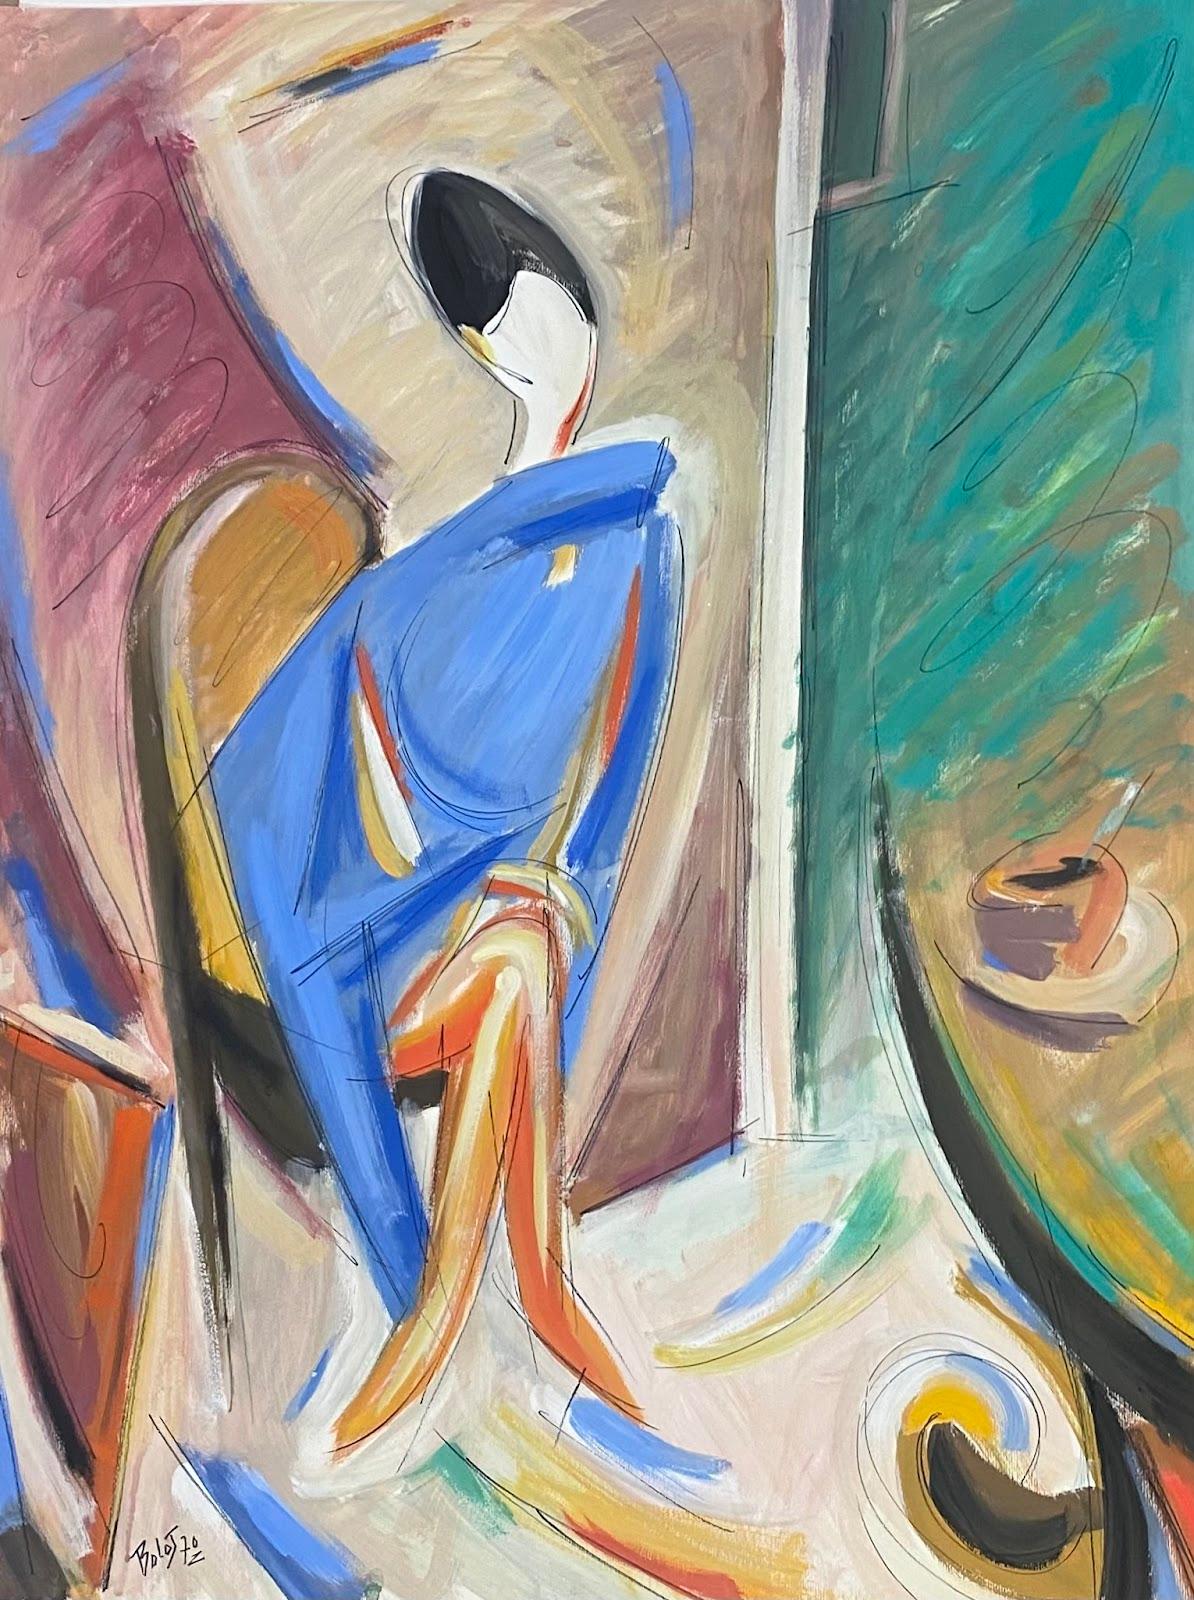 Paul-Louis Bolot (French 1918-2003) Figurative Painting - 20th Century French Modernist Gouache Painting Stylish Lady In Blue Dress